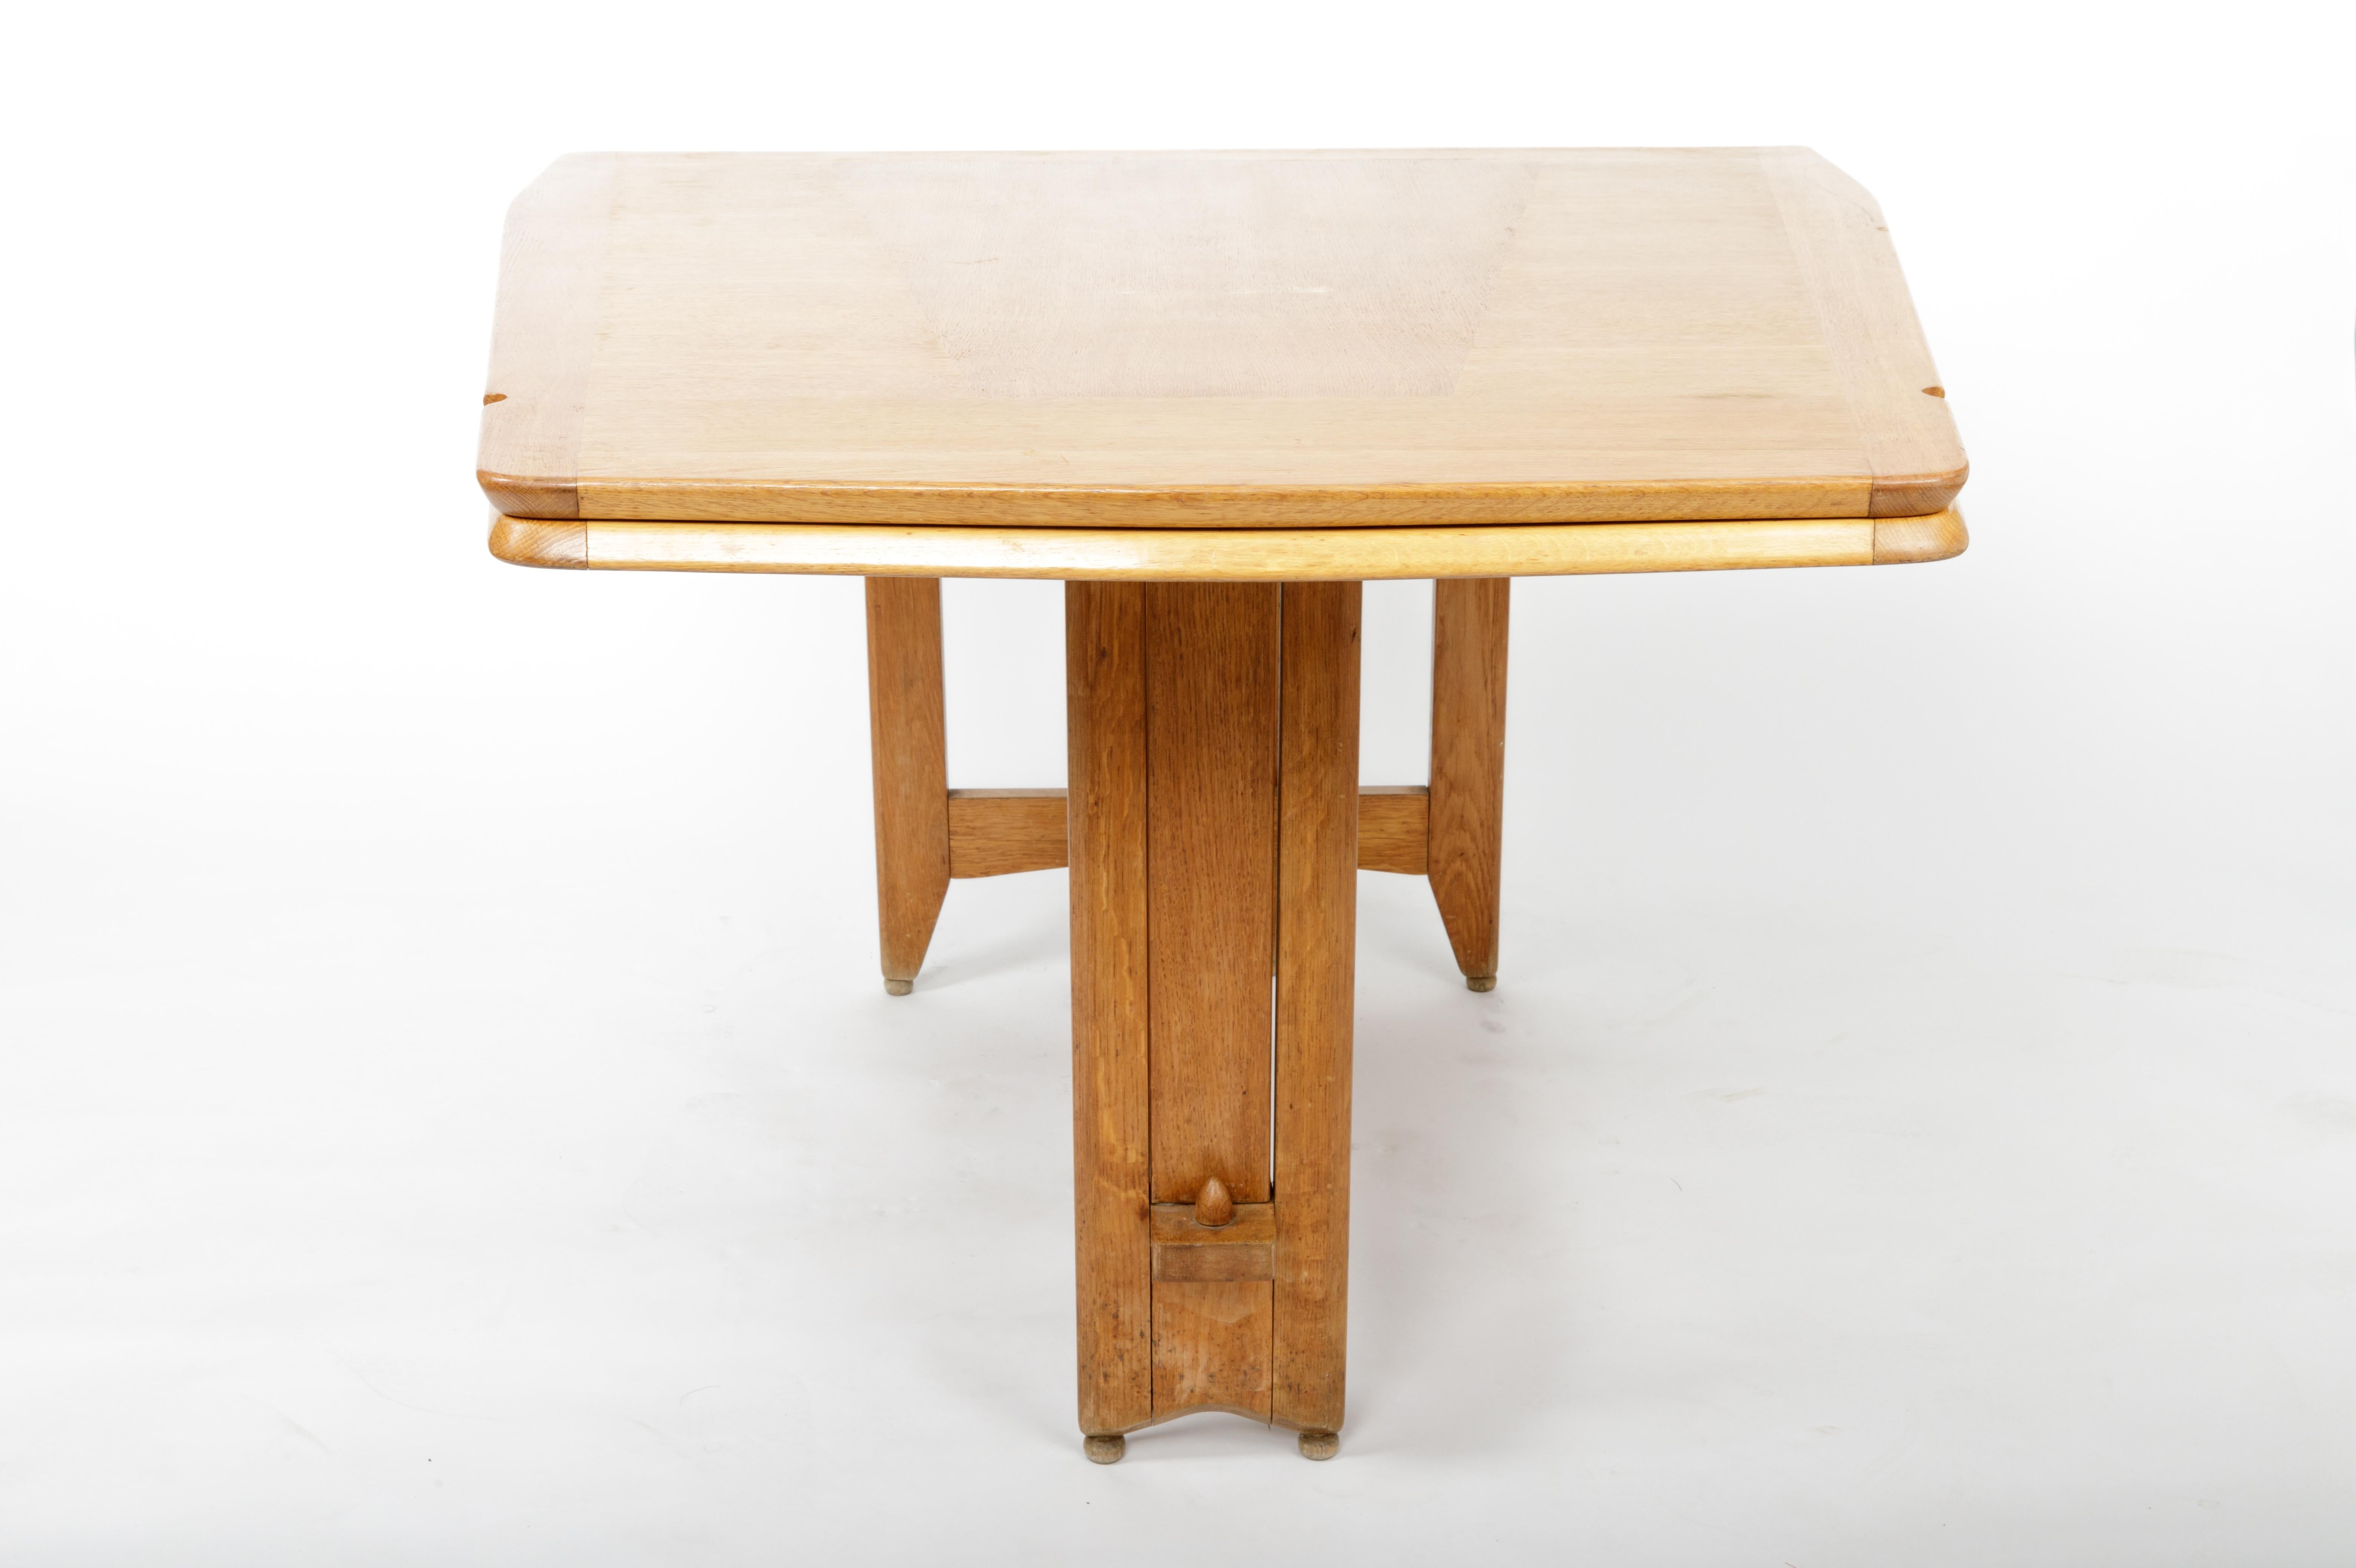 Late 20th Century Guillerme et Chambron Folding Dining Table, France, c. 1970s